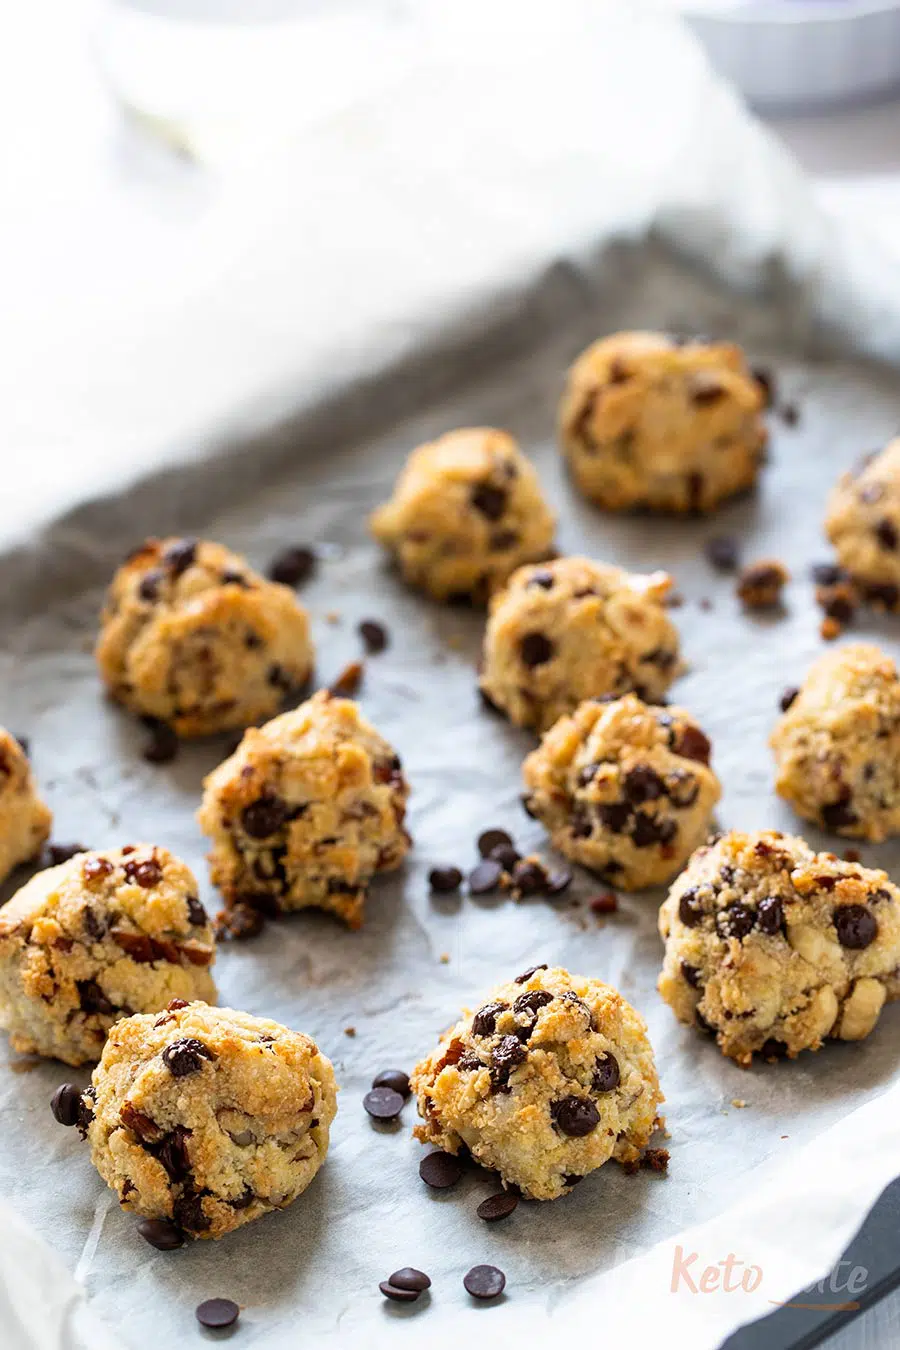 keto cookies recipe with hazelnuts and coconut